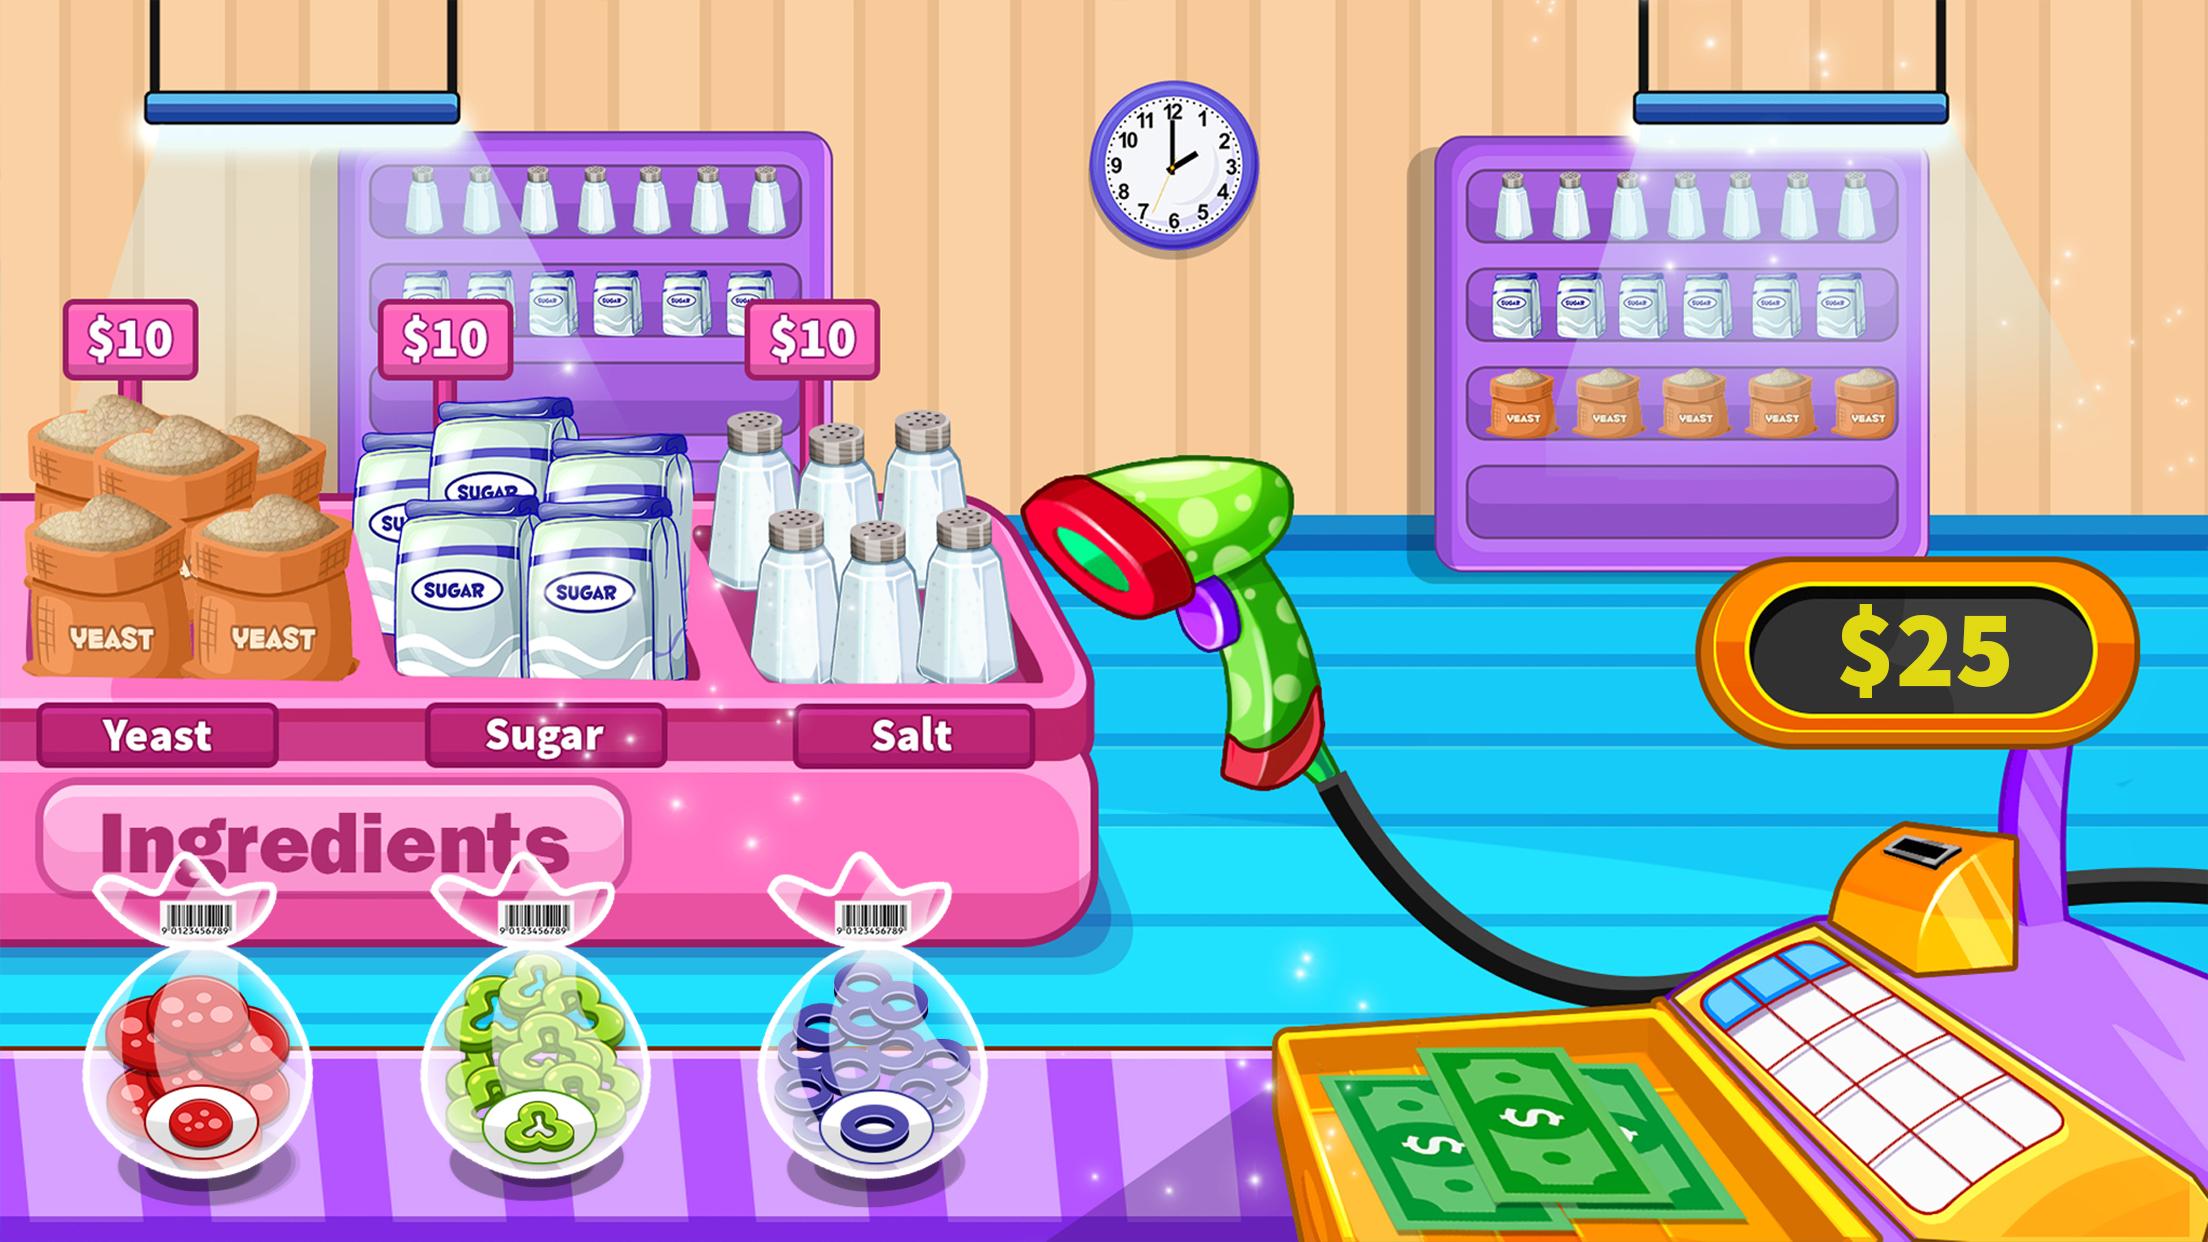 Pizza game. Читы в mari le Chef Coo. Baby Care Kids games.